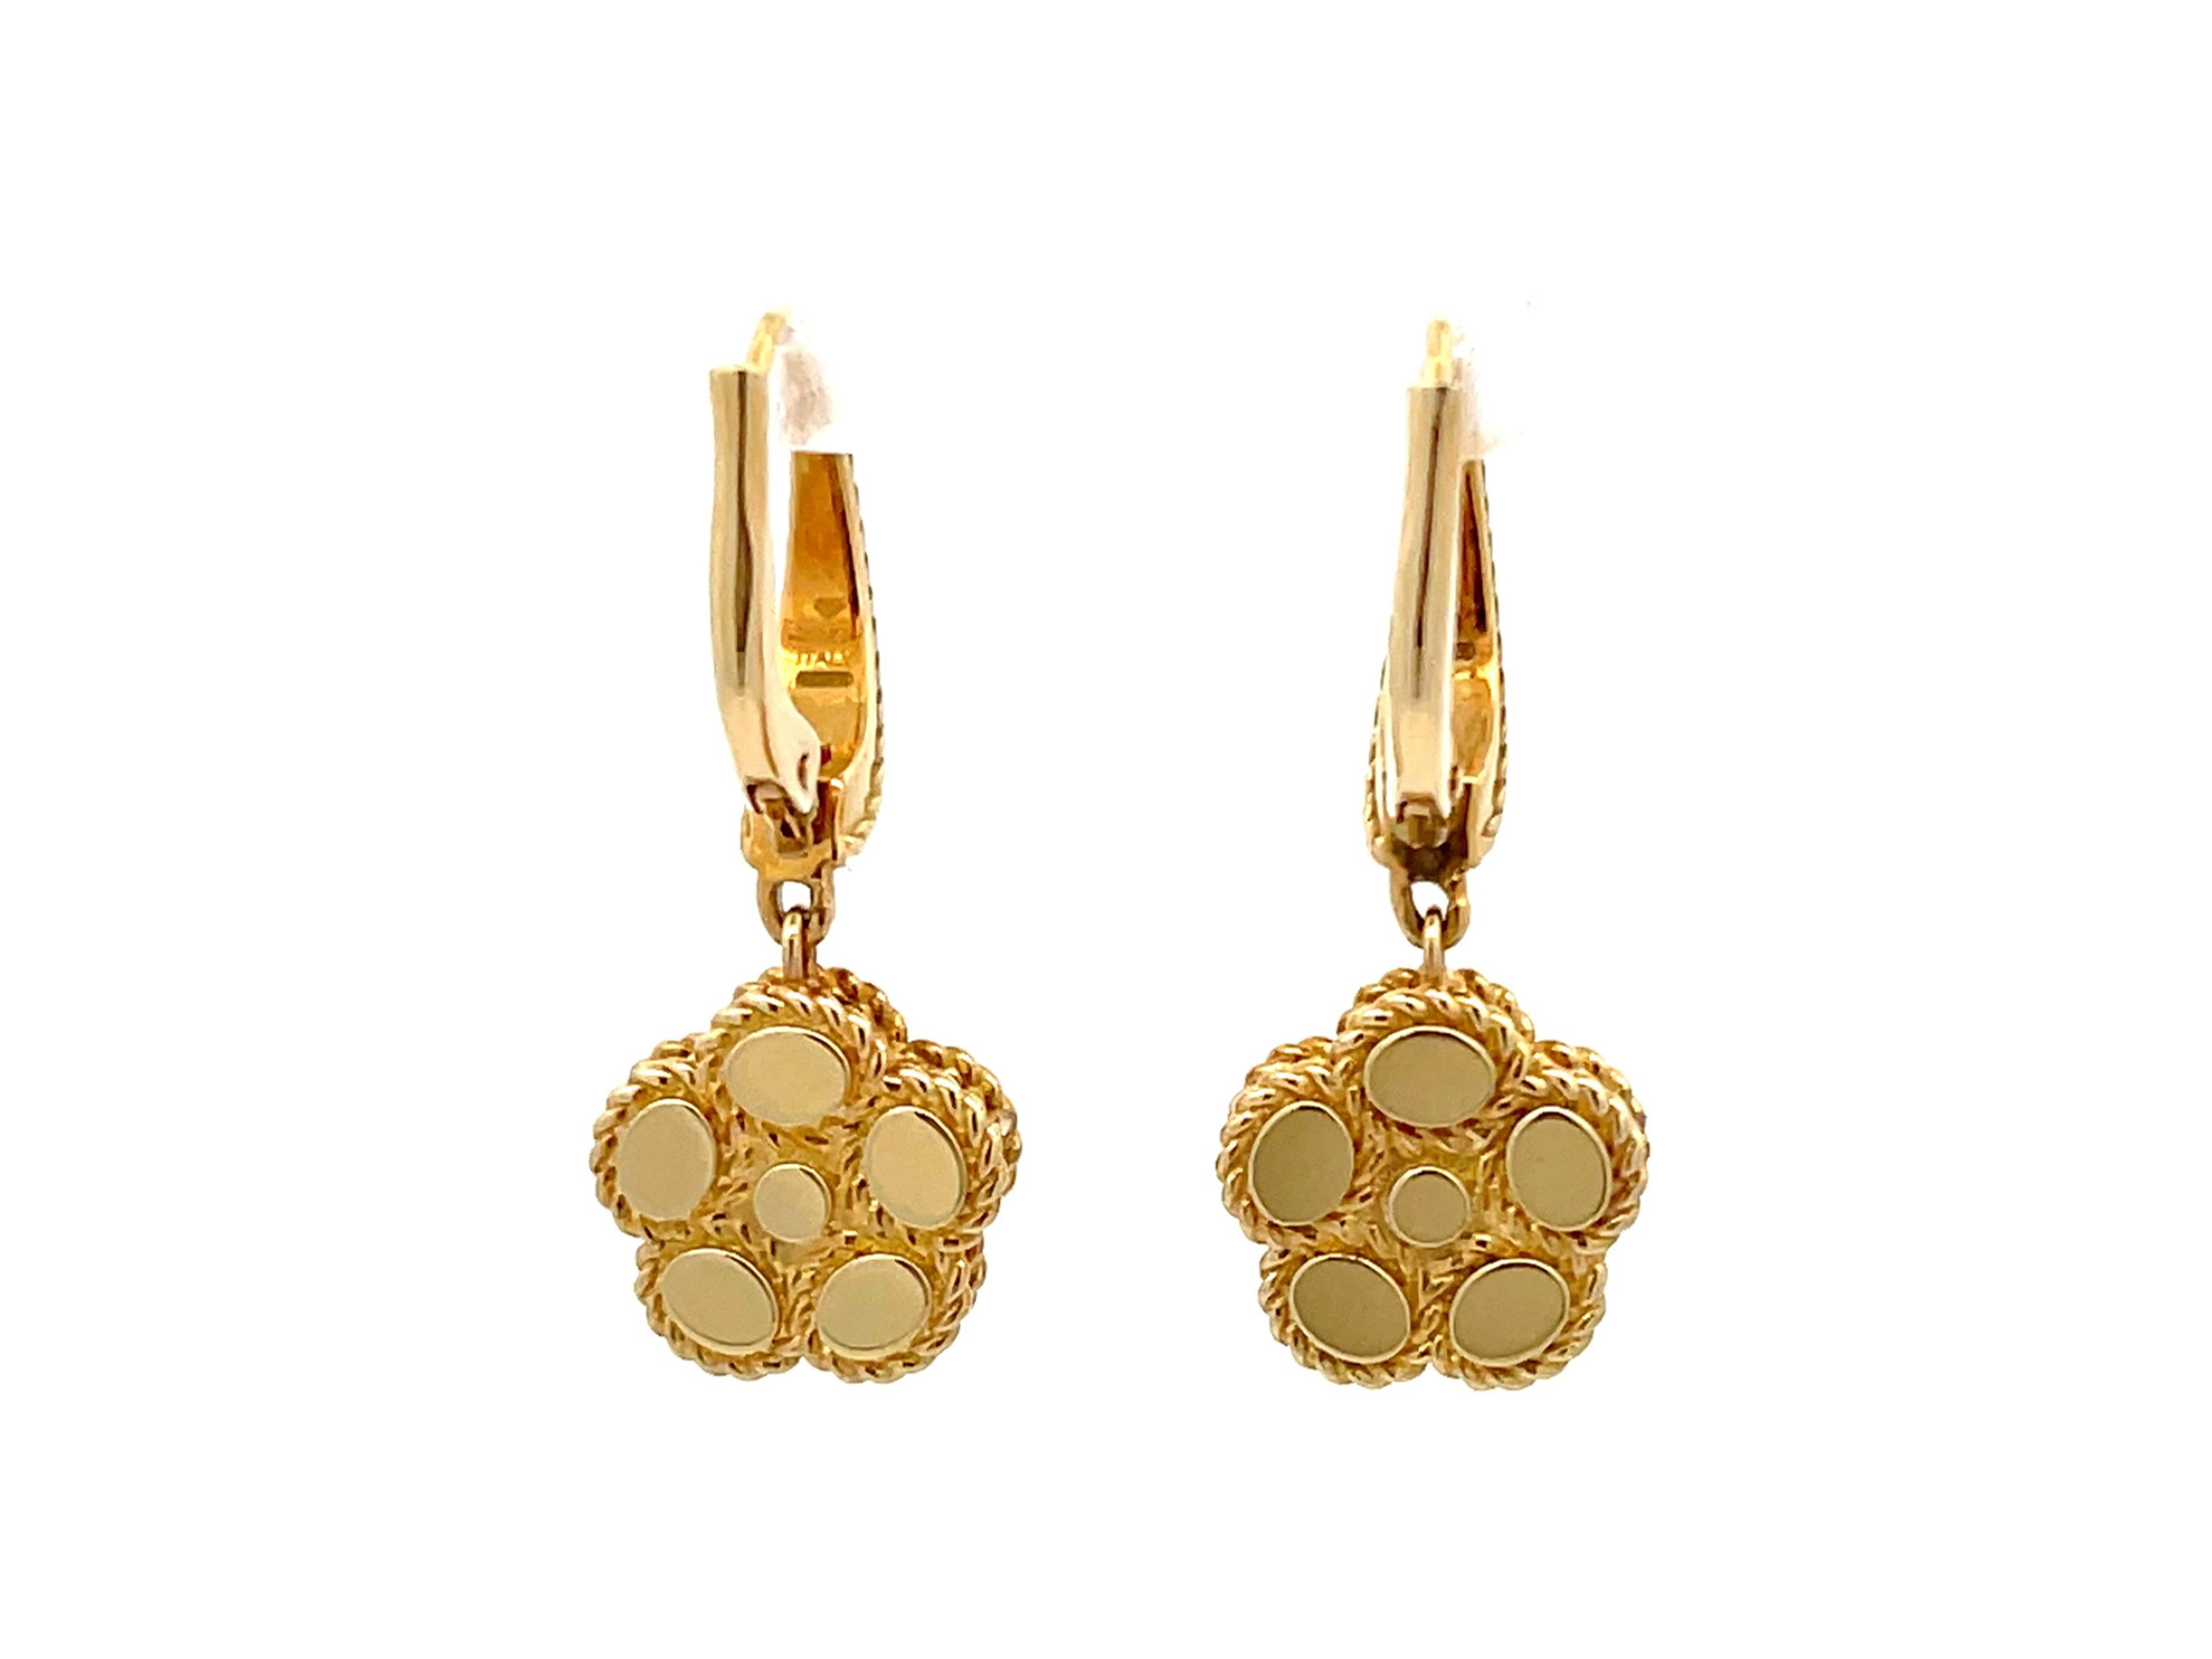 Brilliant Cut Roberto Coin Diamond Daisy Drop Earrings in 18k Yellow Gold For Sale